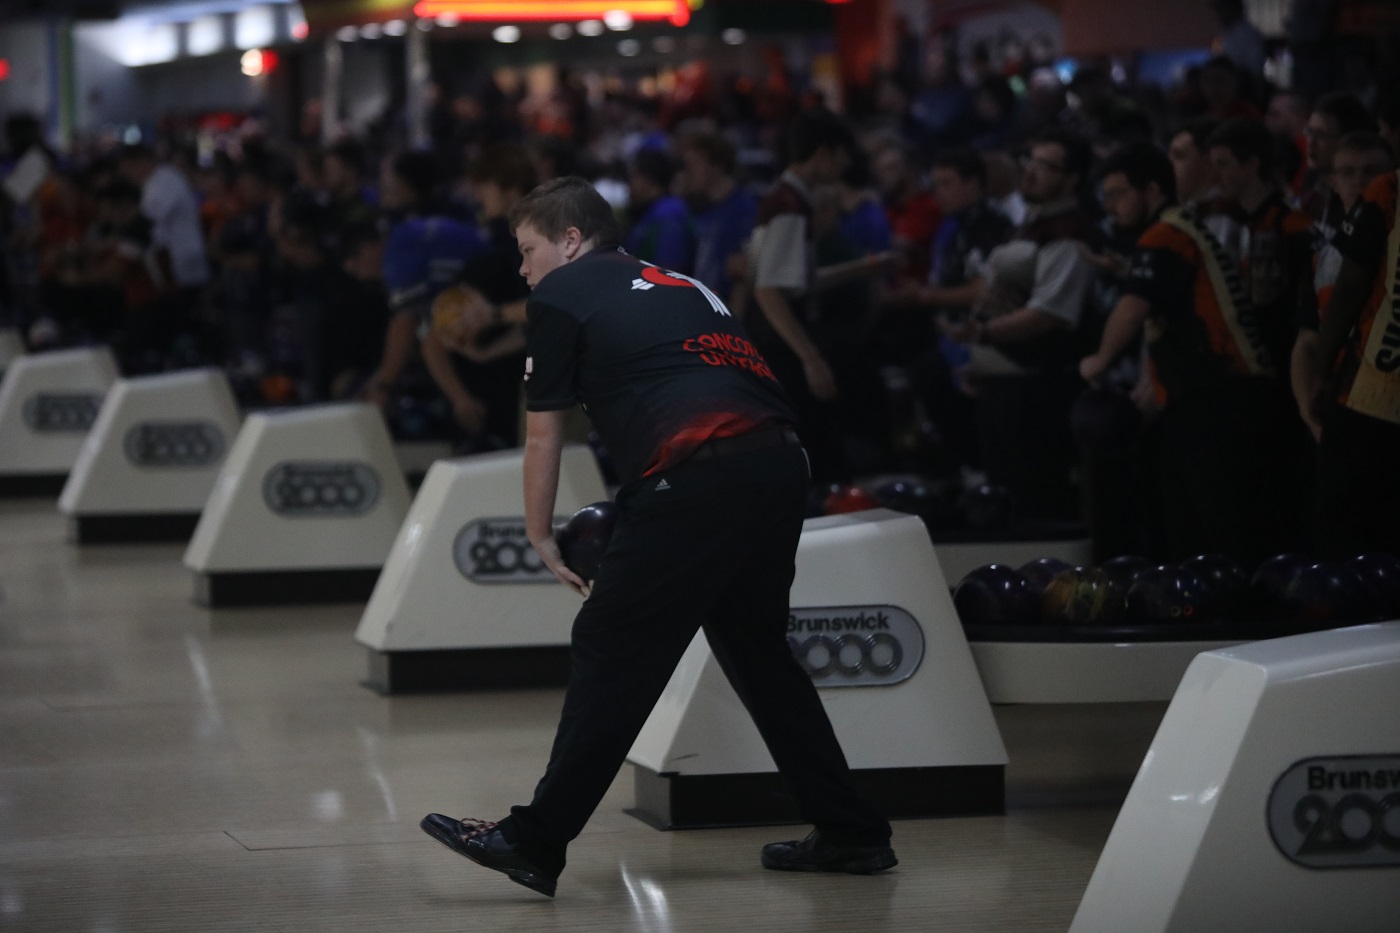 Gossman takes first place at American Heartland Bowling Association event